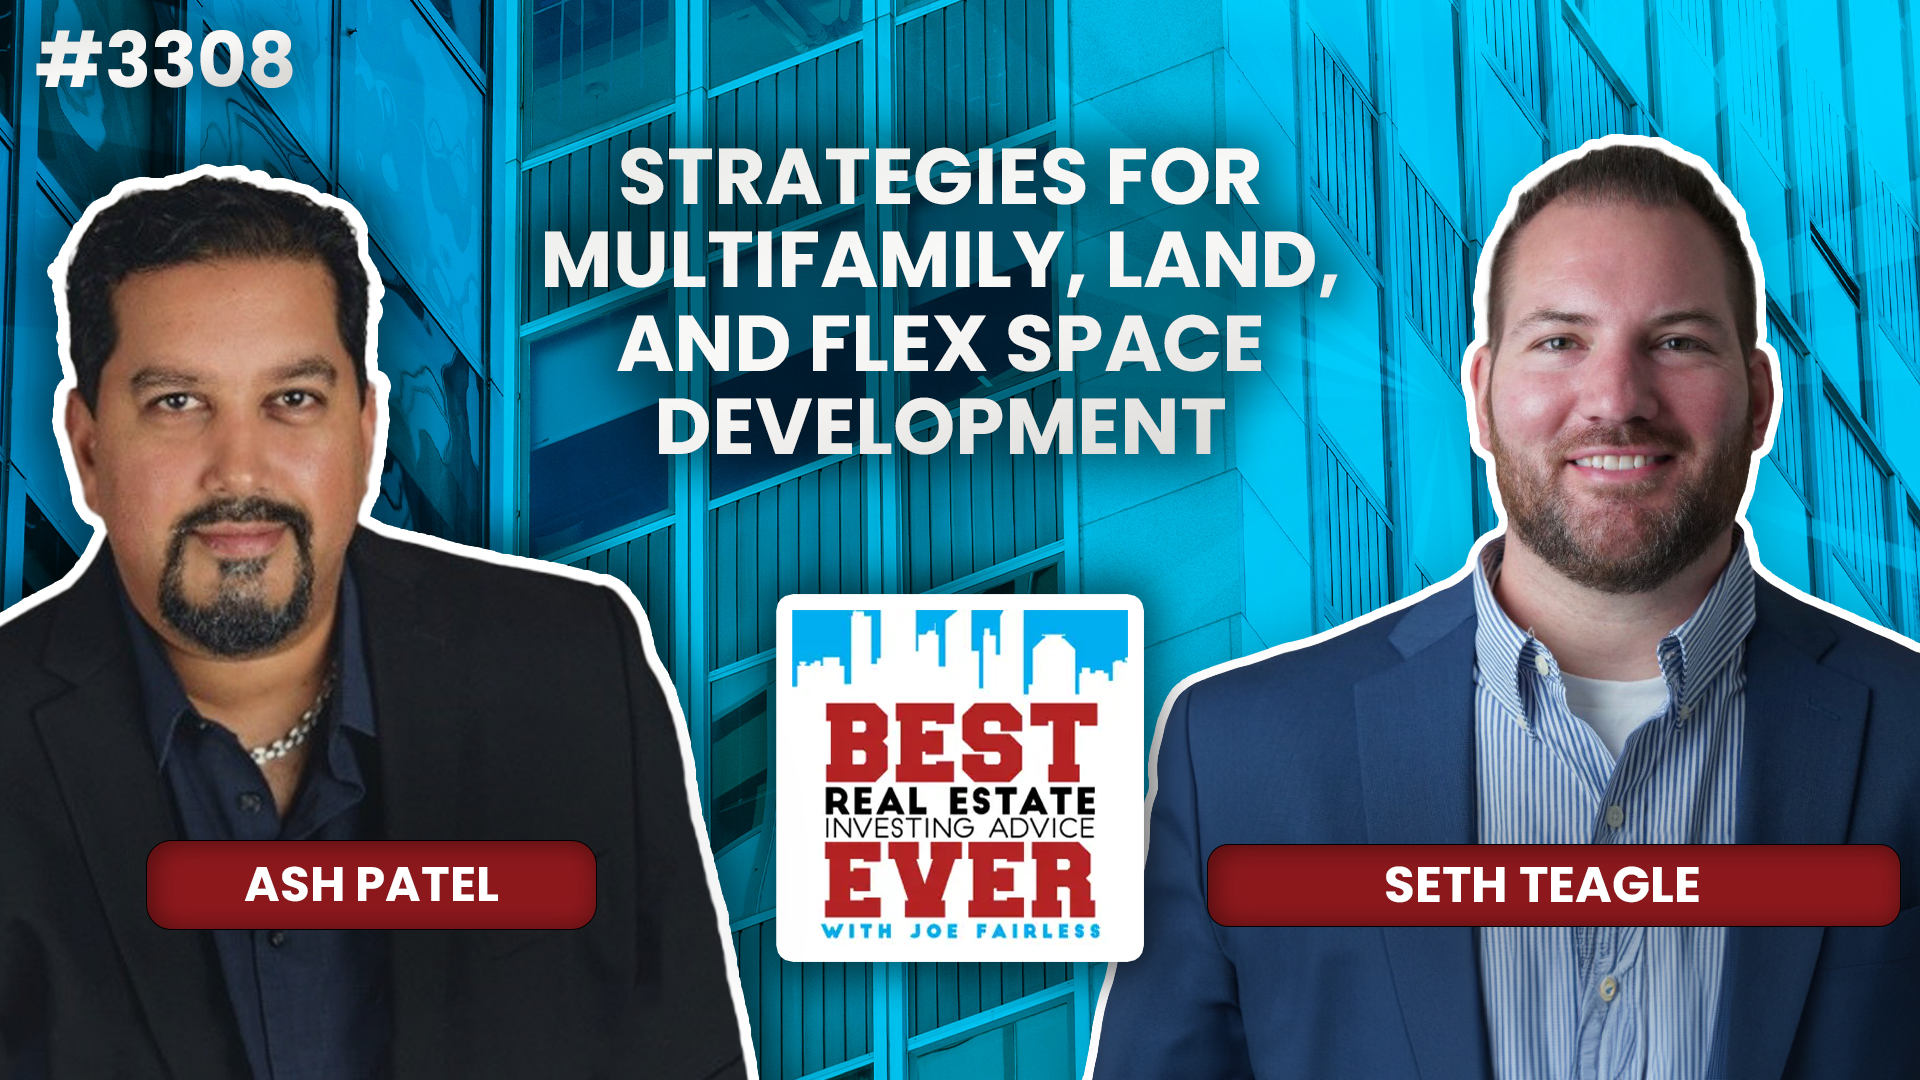 Strategies for Multifamily, Land, and Flex Space Development